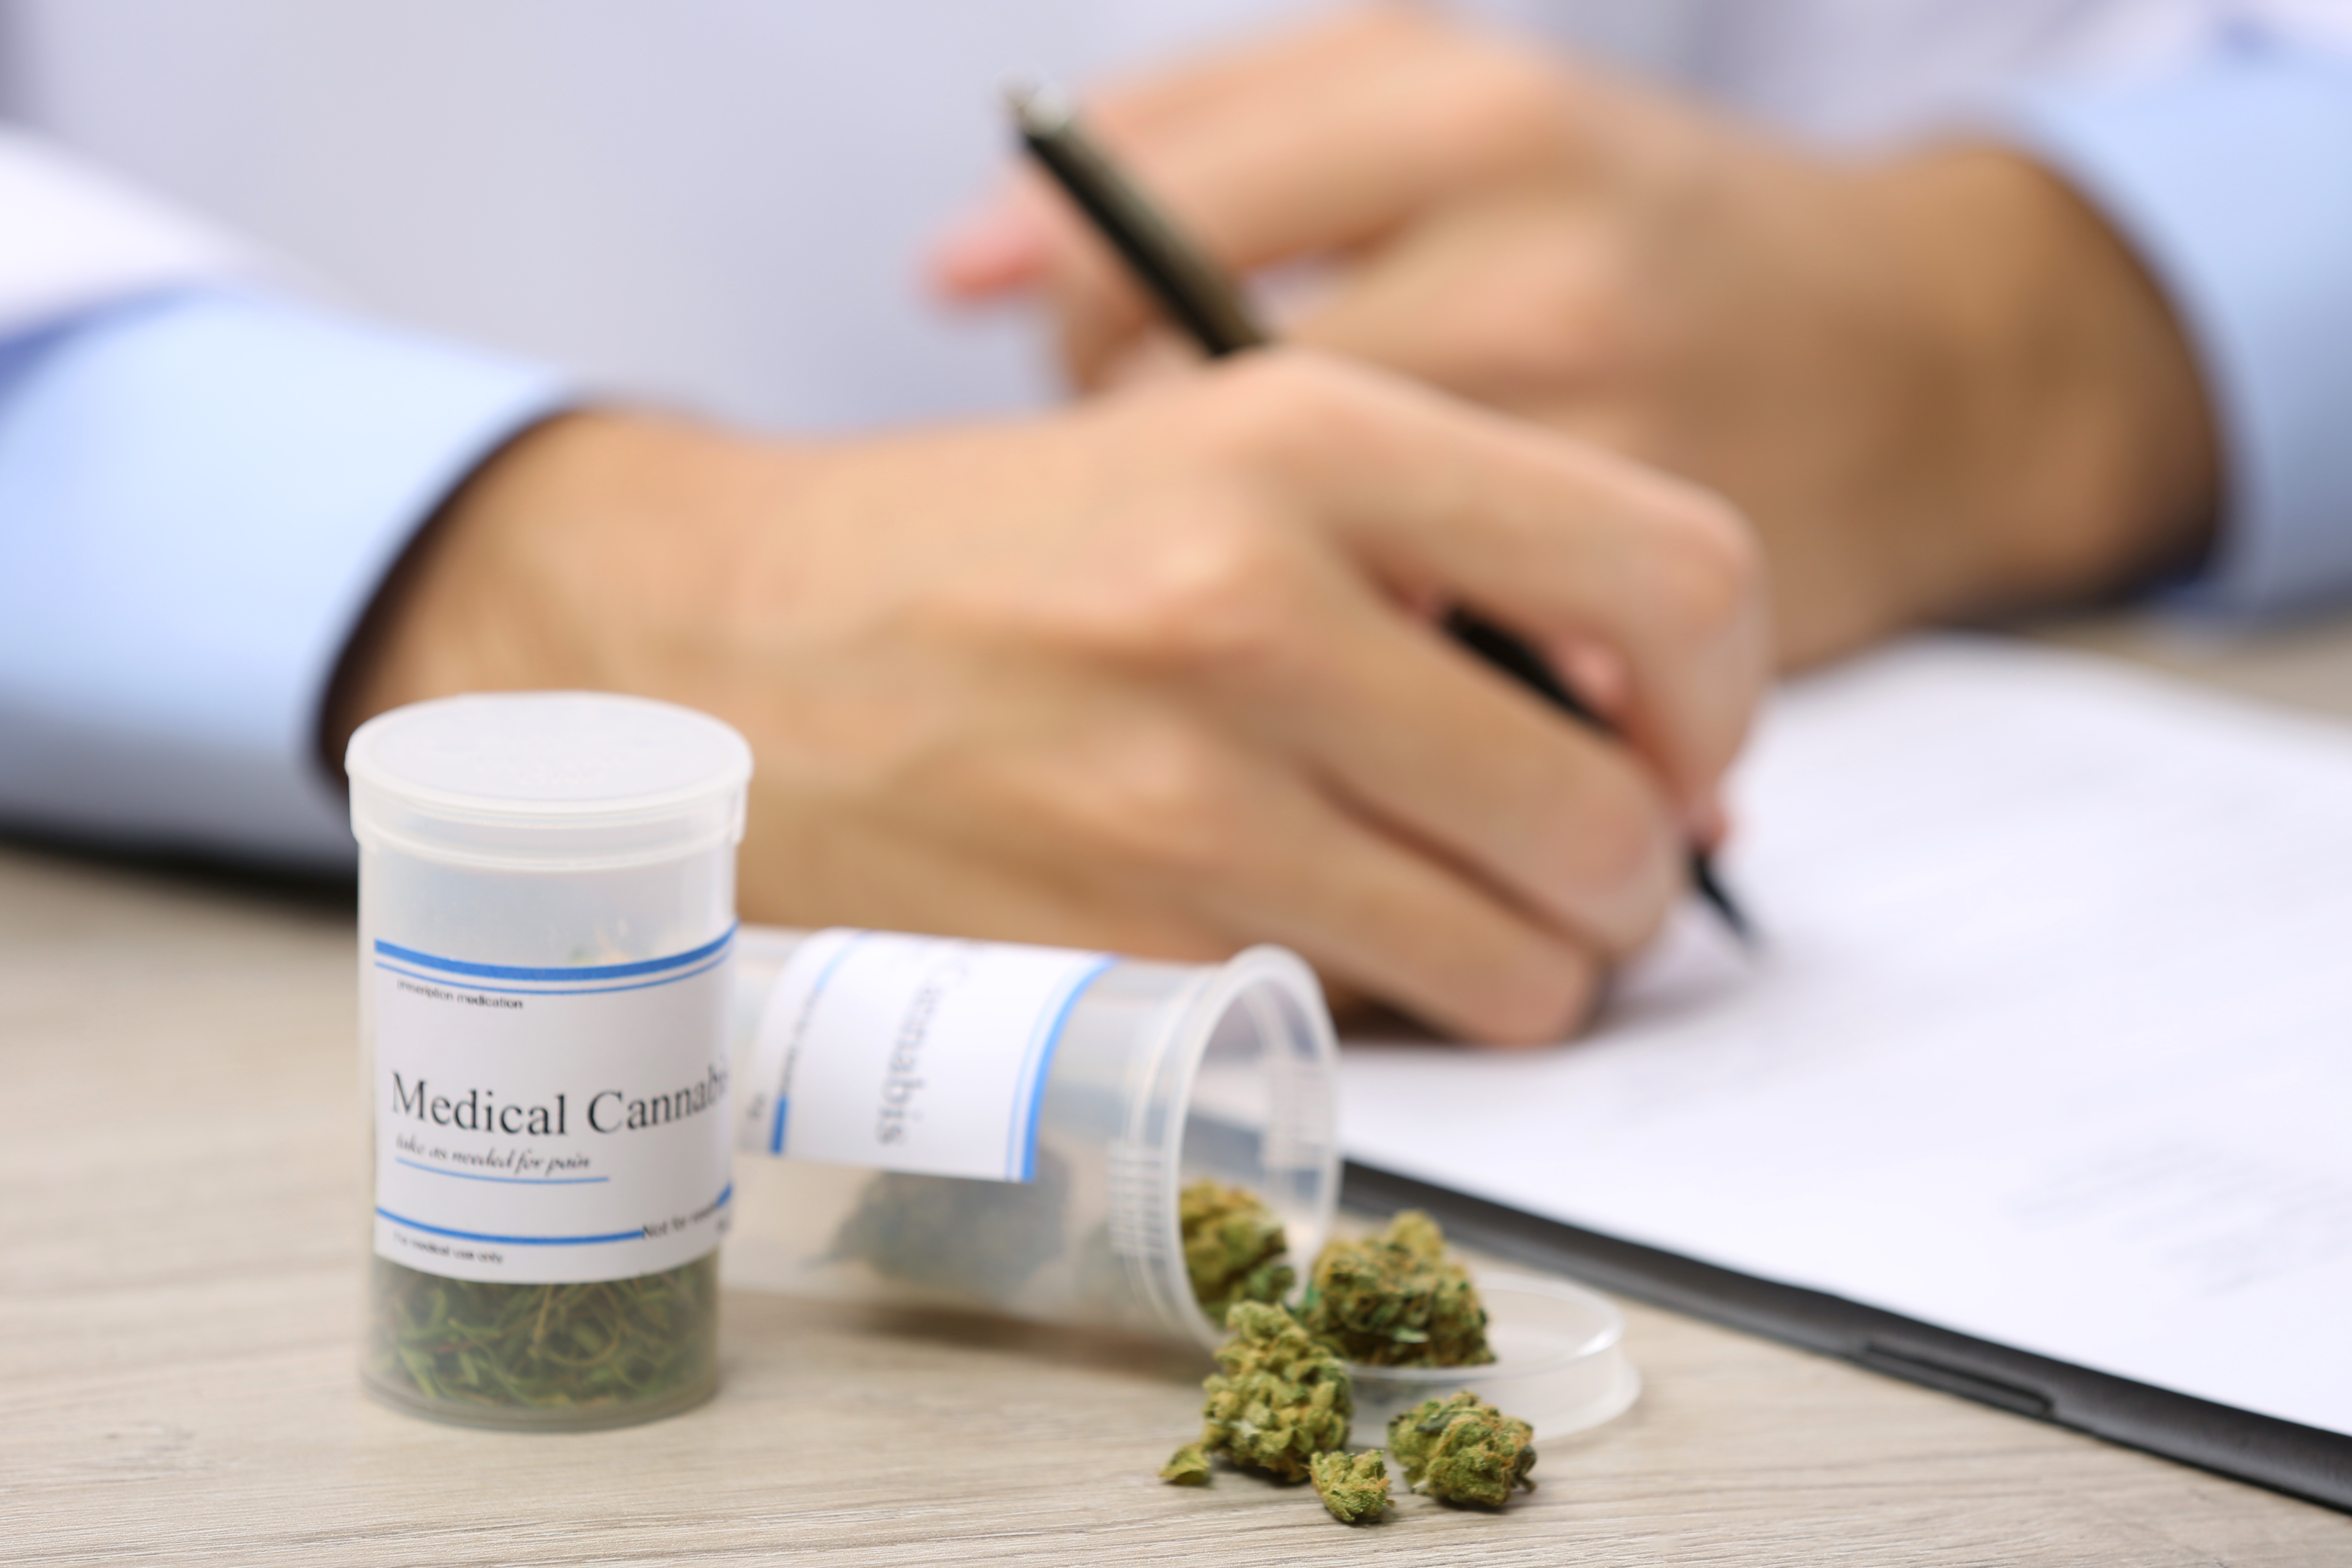 Medical cannabis use and your rights at work